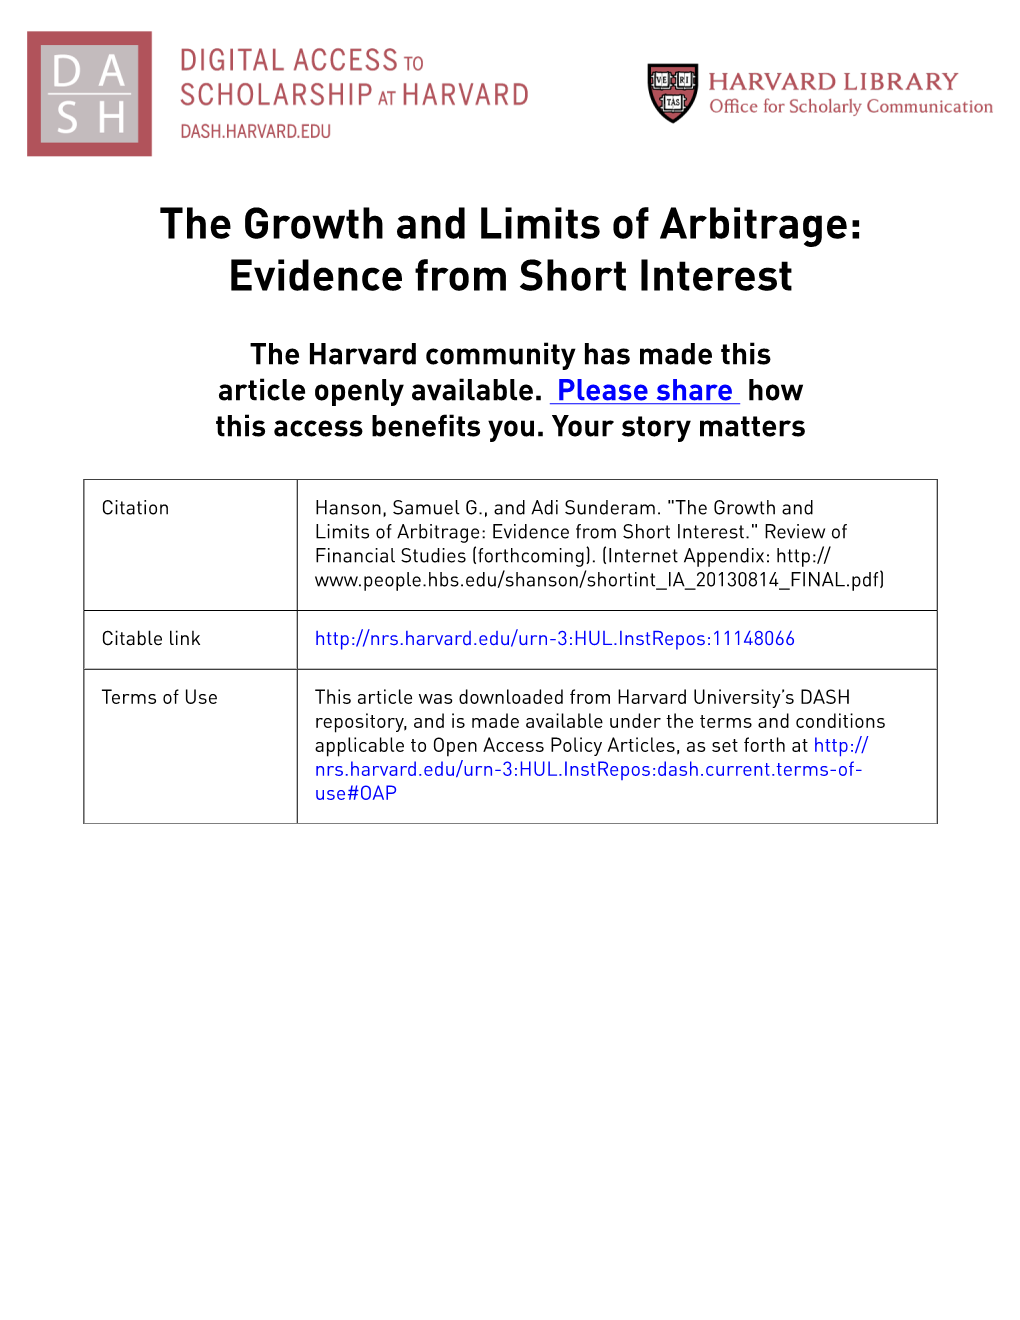 The Growth and Limits of Arbitrage: Evidence from Short Interest